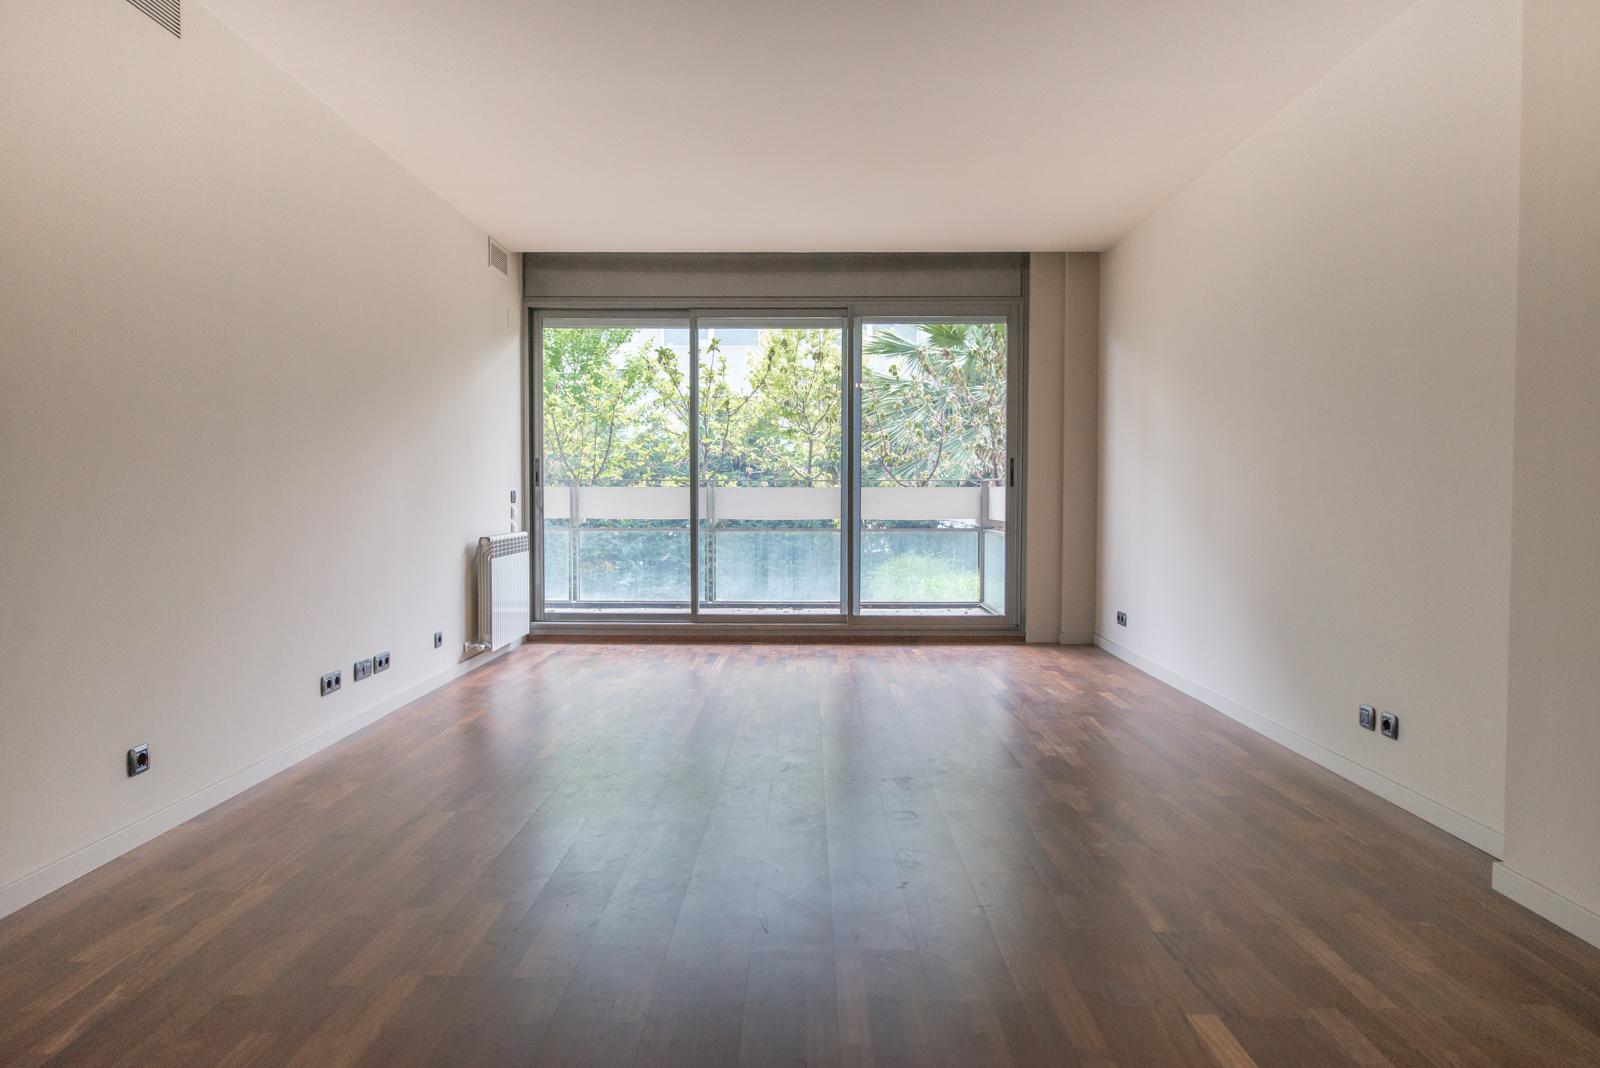 151215 Flat for sale in Gràcia, Vallcarca and les Penitents 4